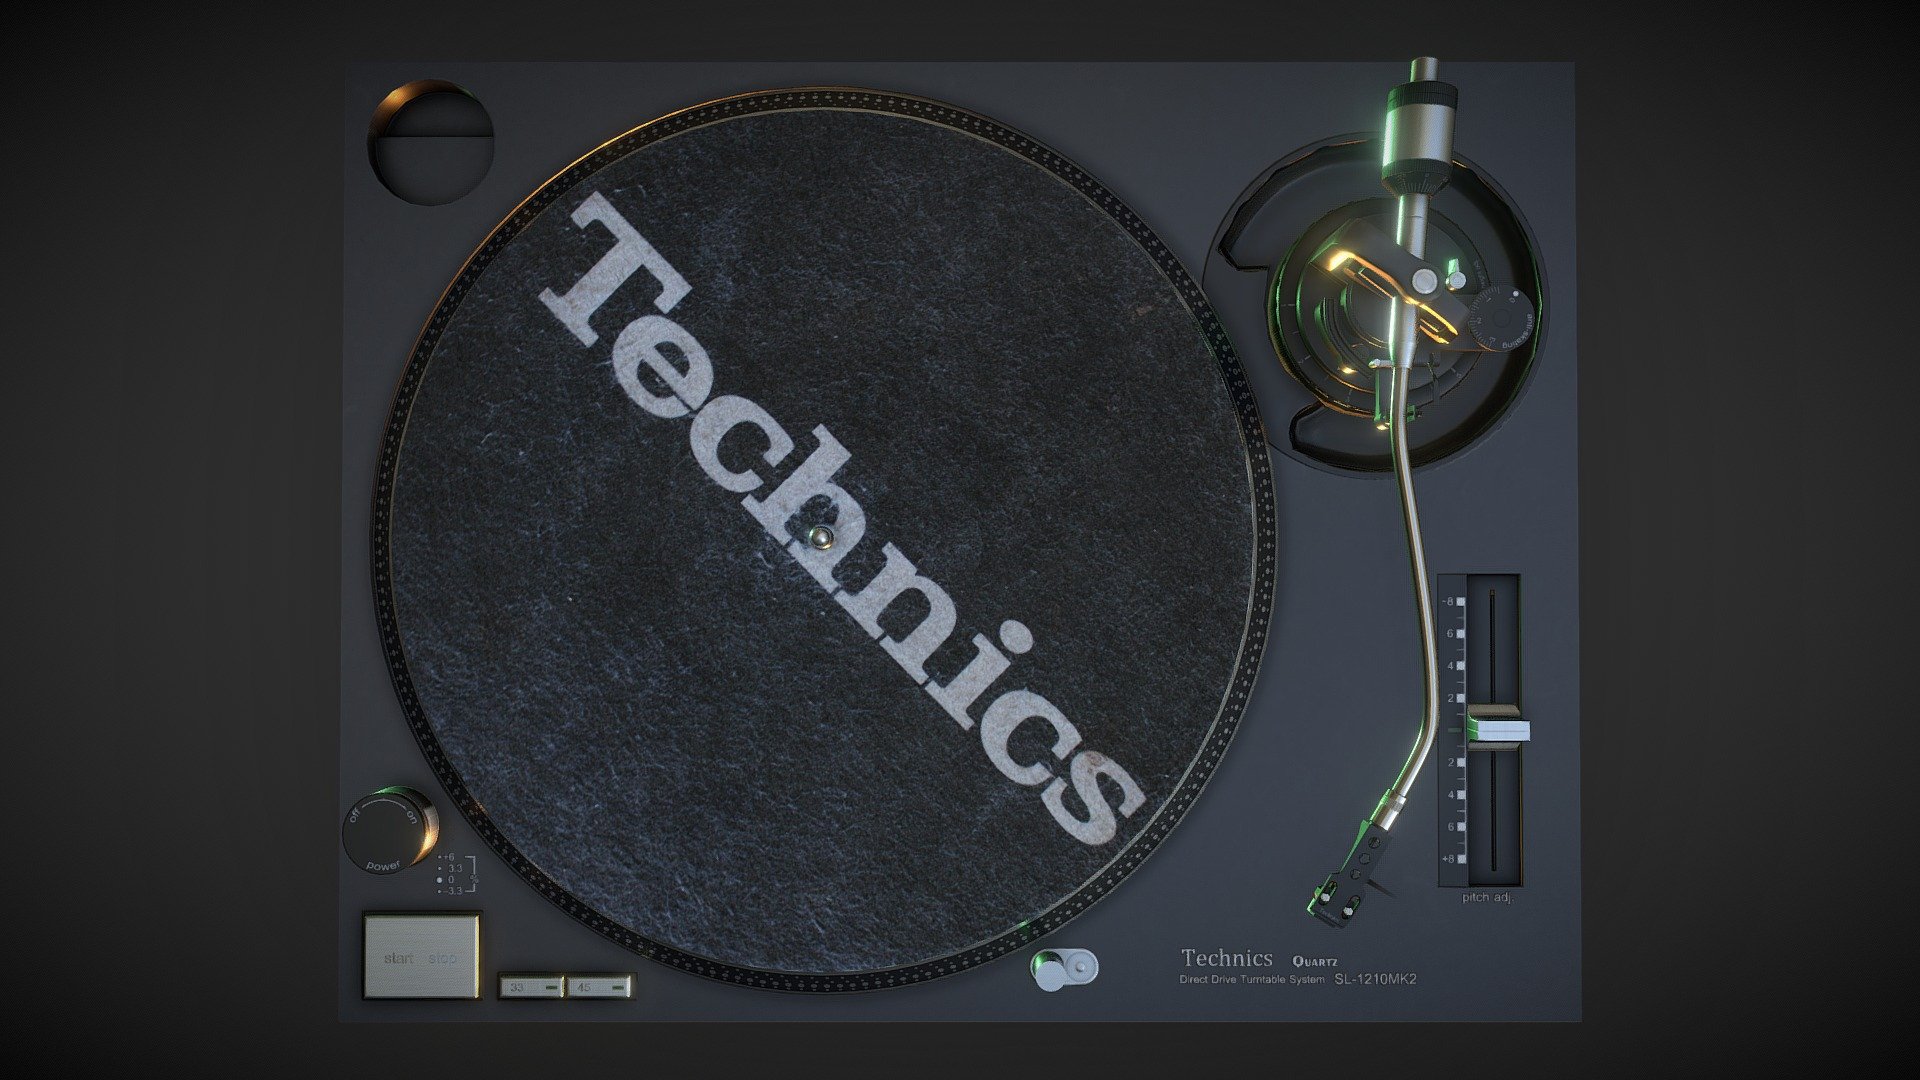 Technics SL-1200 is a series of direct-drive turntables originally manufactured from October 1972 until 2010, and resumed in 2016, by Matsushita (now Panasonic) under the brand name of Technics. S means &ldquo;Stereo